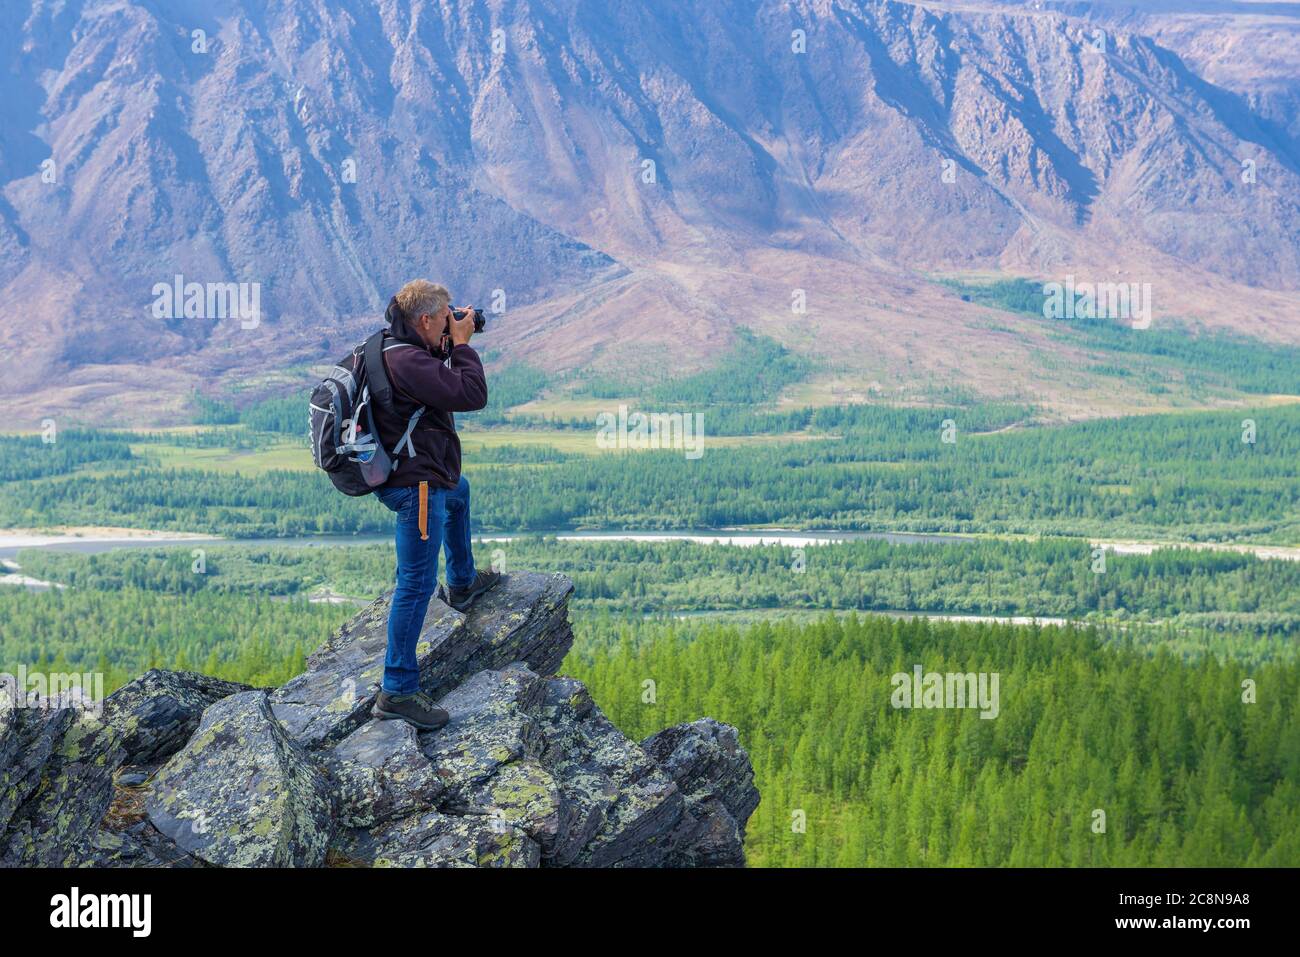 TYUMEN REGION, RUSSIA - AUGUST 20, 2019: Travel photographer on the set in the mountains of the Polar Urals. Stock Photo